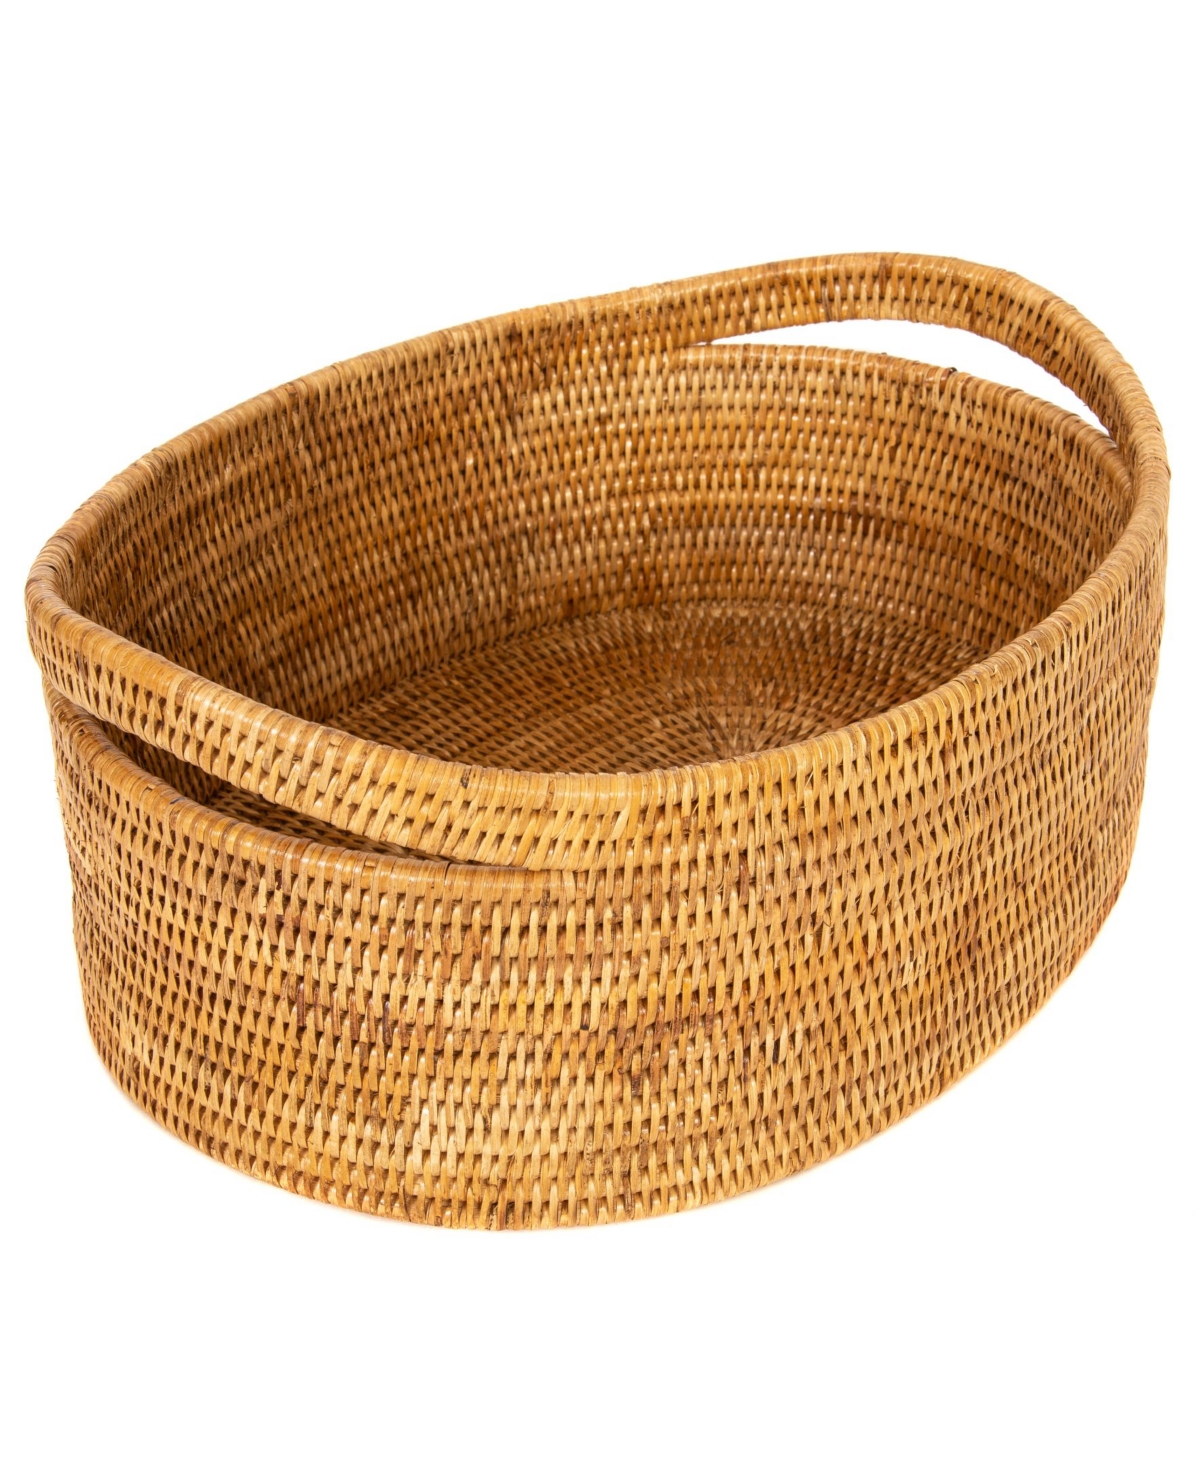 Artifacts Trading Company Artifacts Rattan Oval Basket With Cutout Handles In Medium Brown